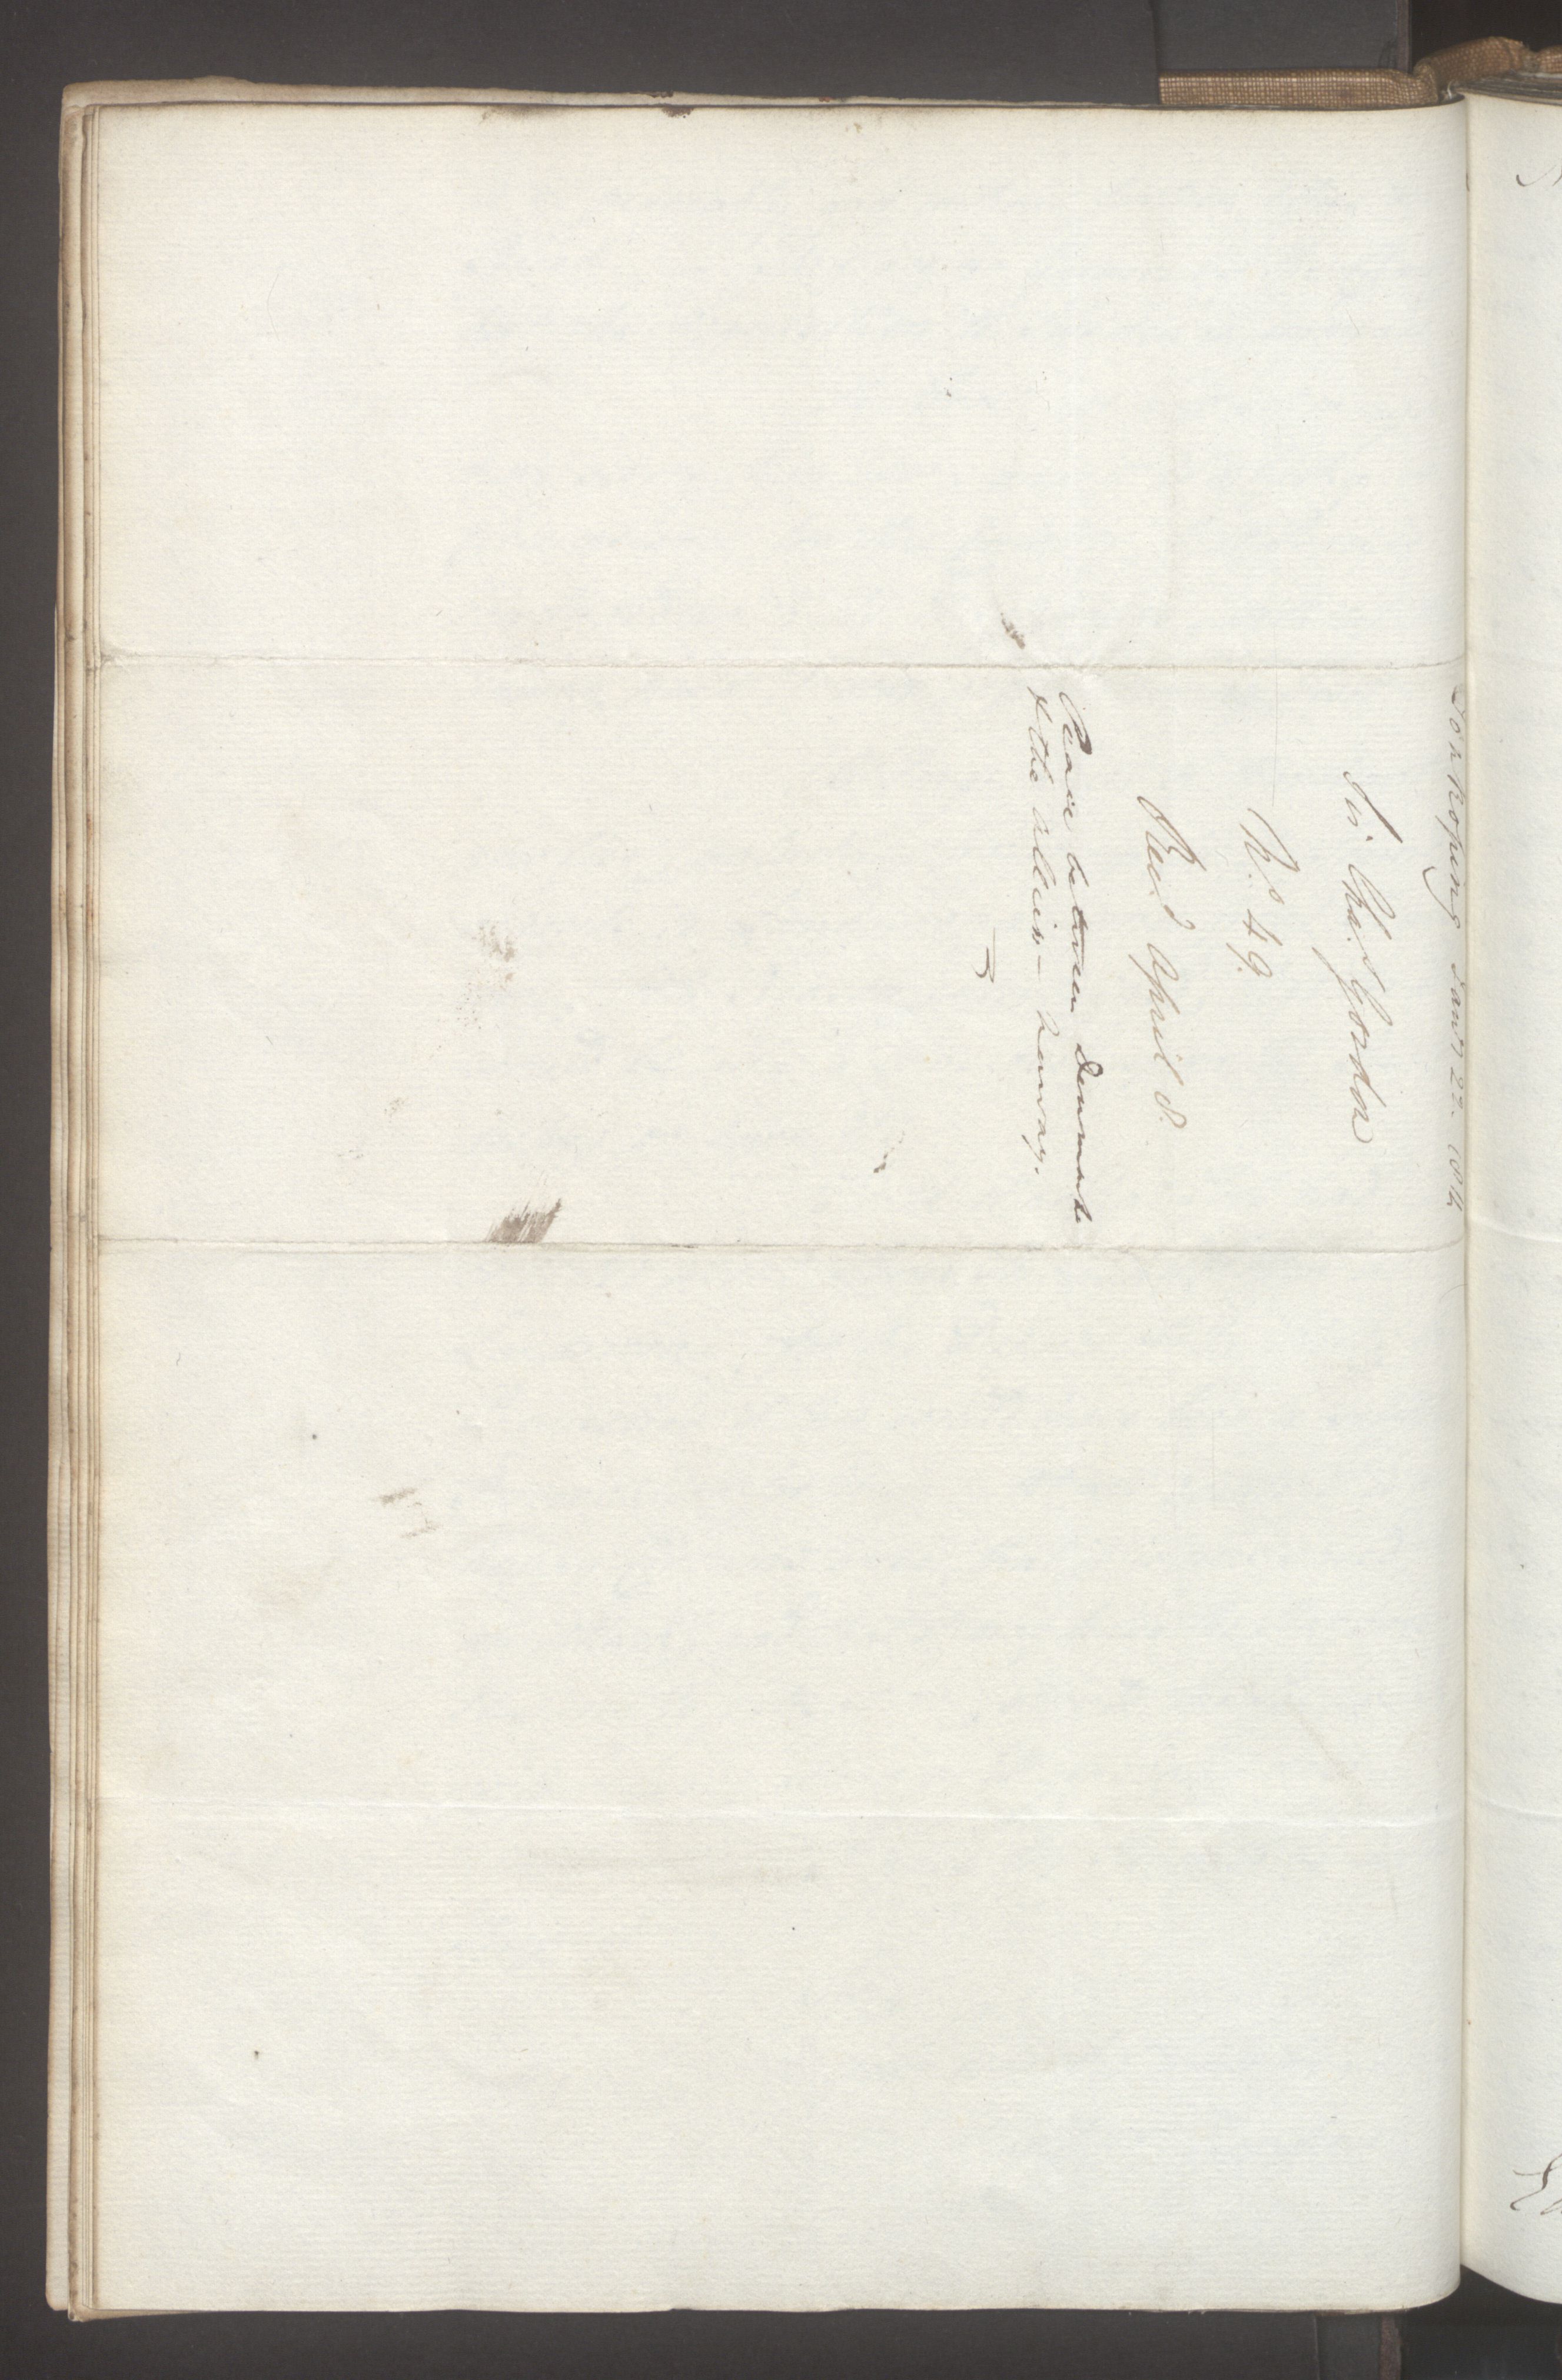 Foreign Office*, UKA/-/FO 38/16: Sir C. Gordon. Reports from Malmö, Jonkoping, and Helsingborg, 1814, s. 13